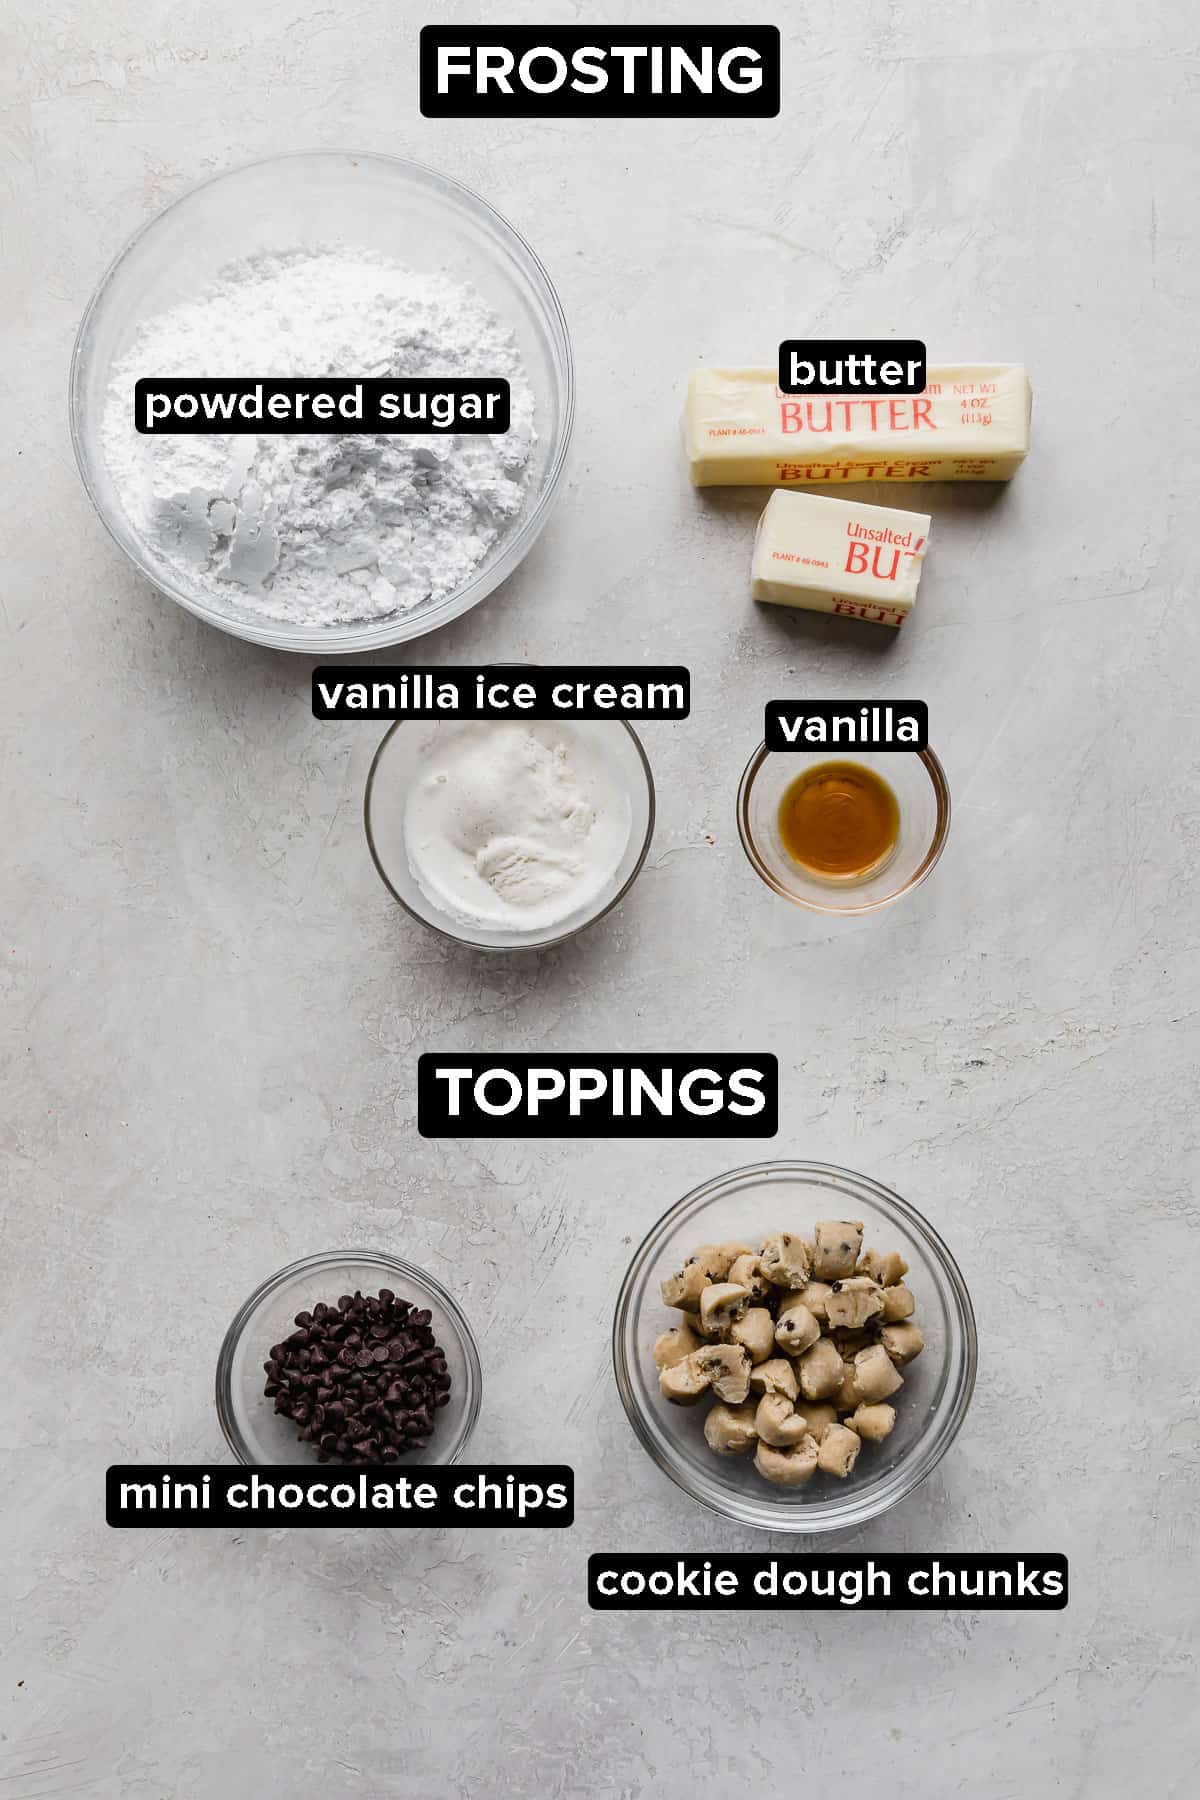 Crumbl Cookie Dough Cookie frosting and topping ingredients on a gray background.